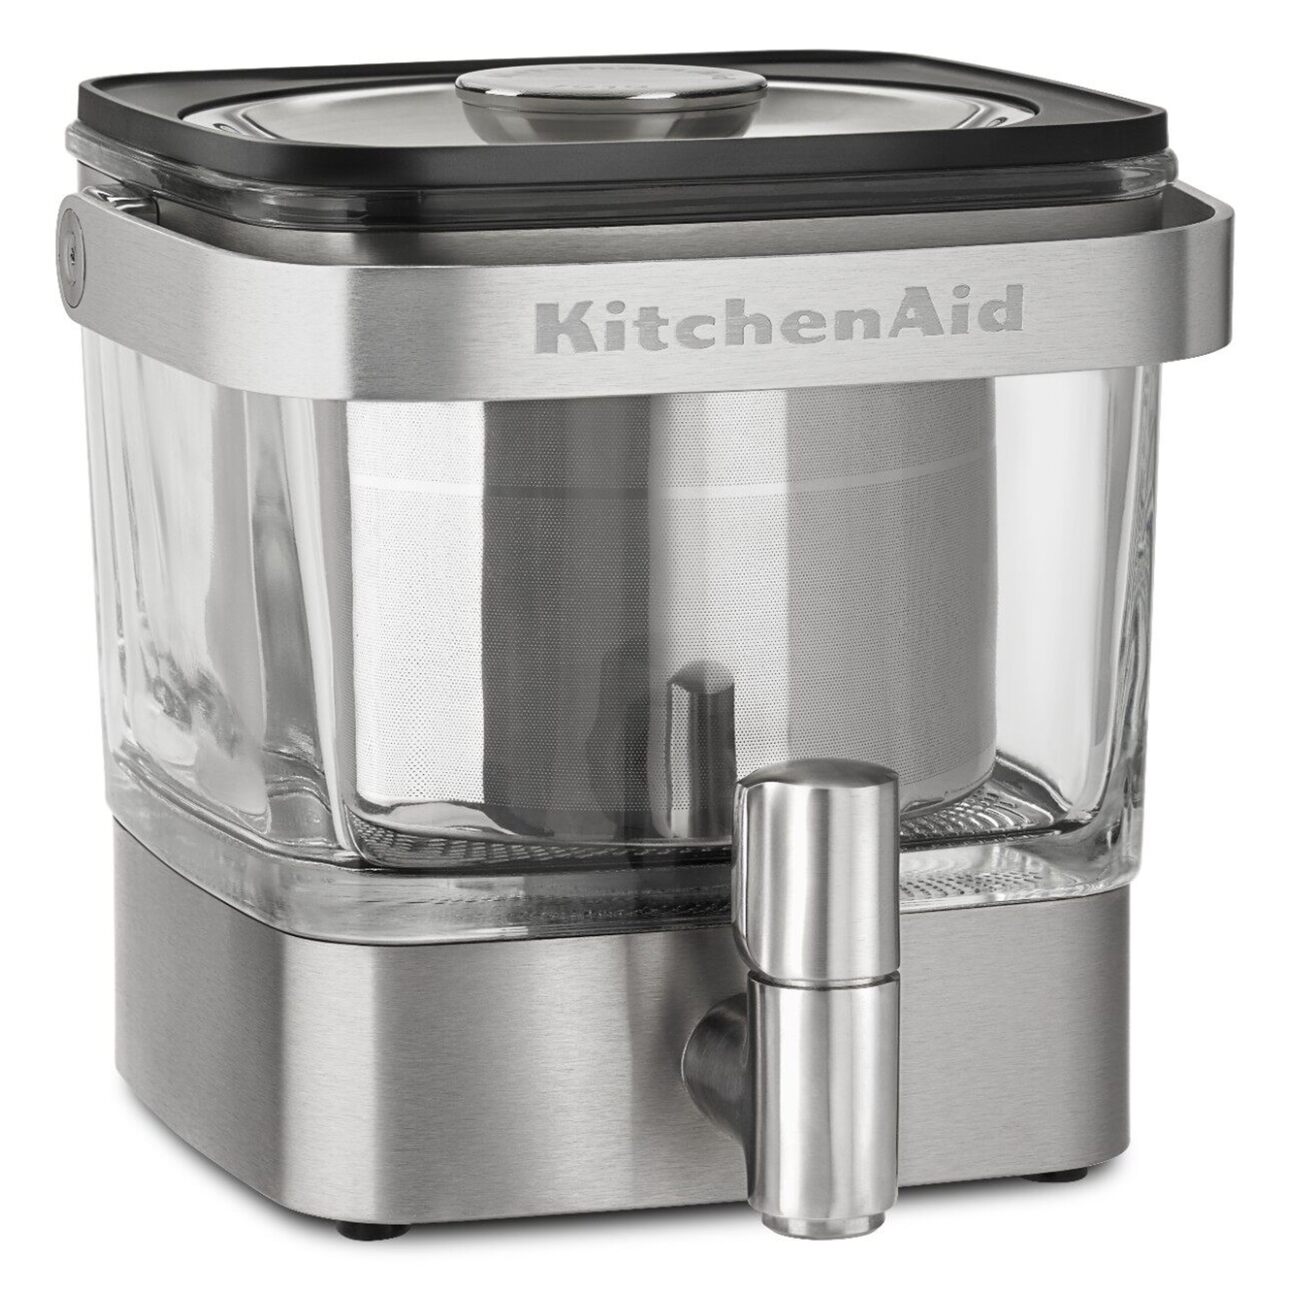 KitchenAid 28 oz Cold Brew Coffee Maker, Brushed Stainless Steel, KCM4212 - image 1 of 8